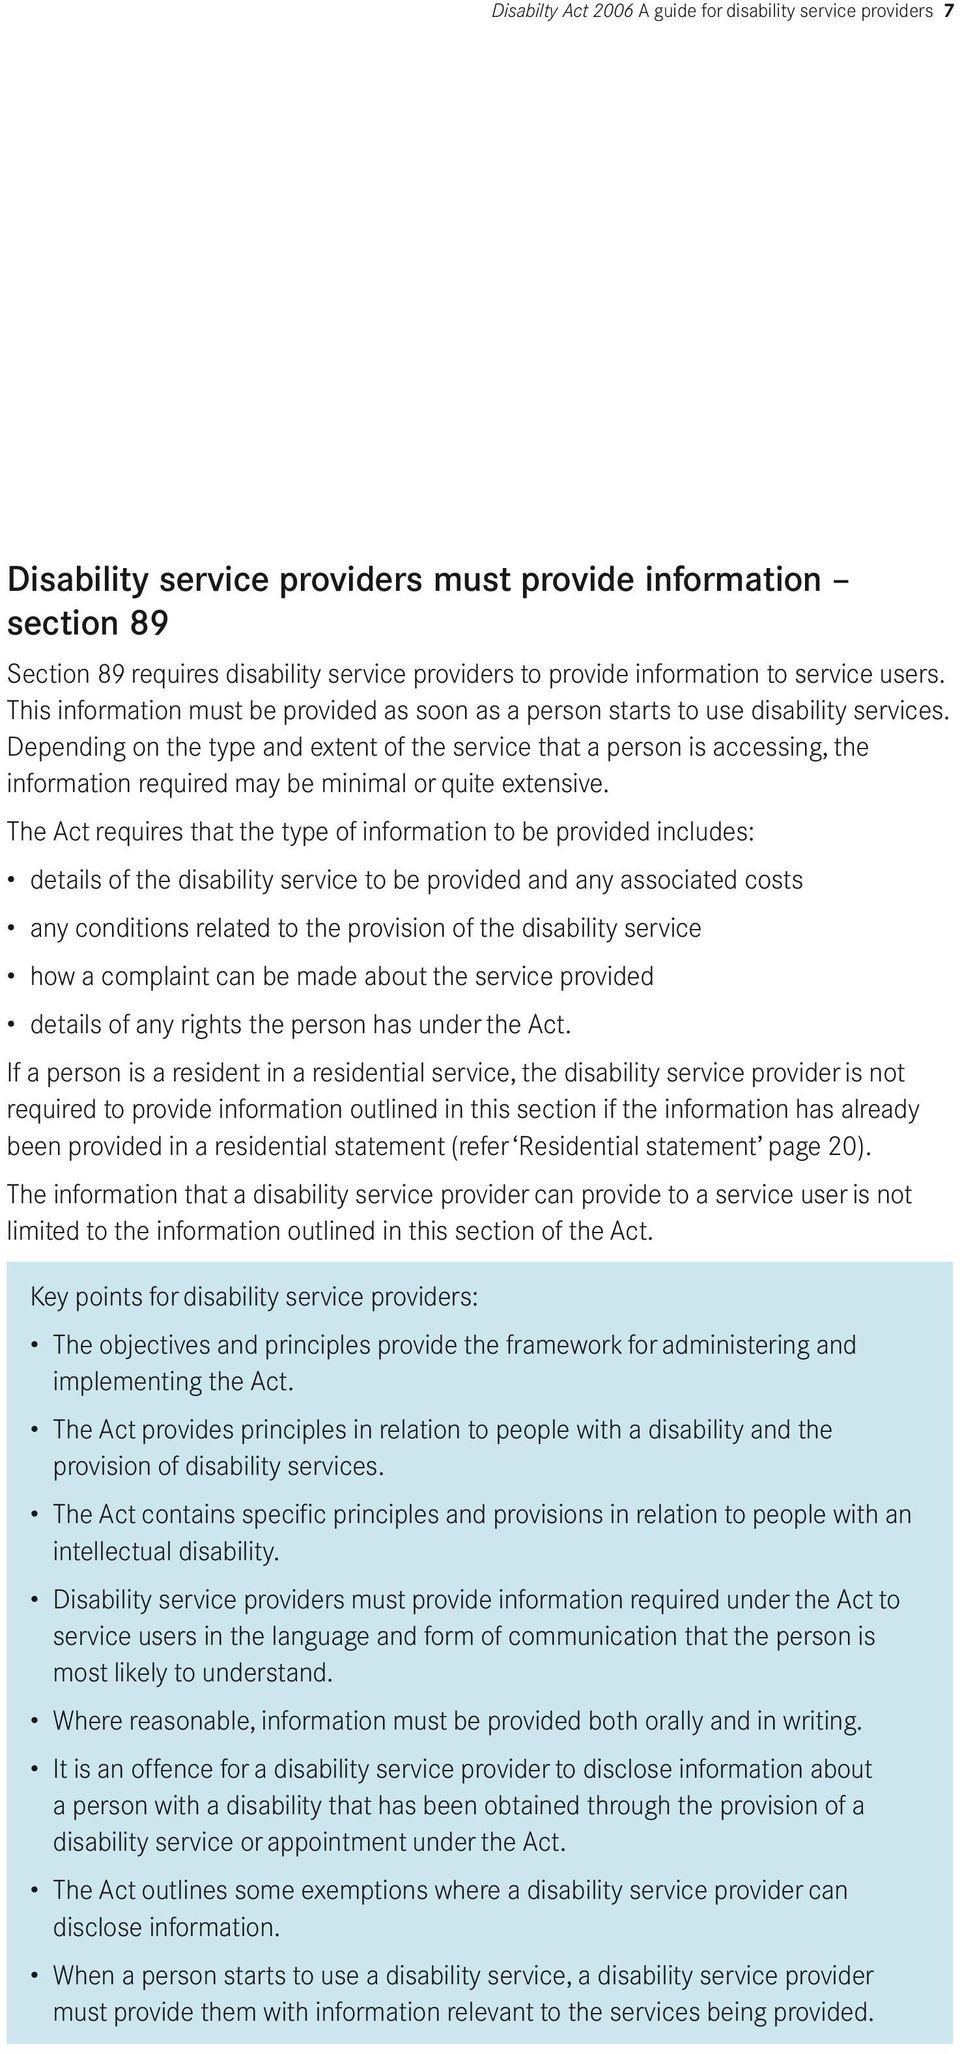 Depending on the type and extent of the service that a person is accessing, the information required may be minimal or quite extensive.